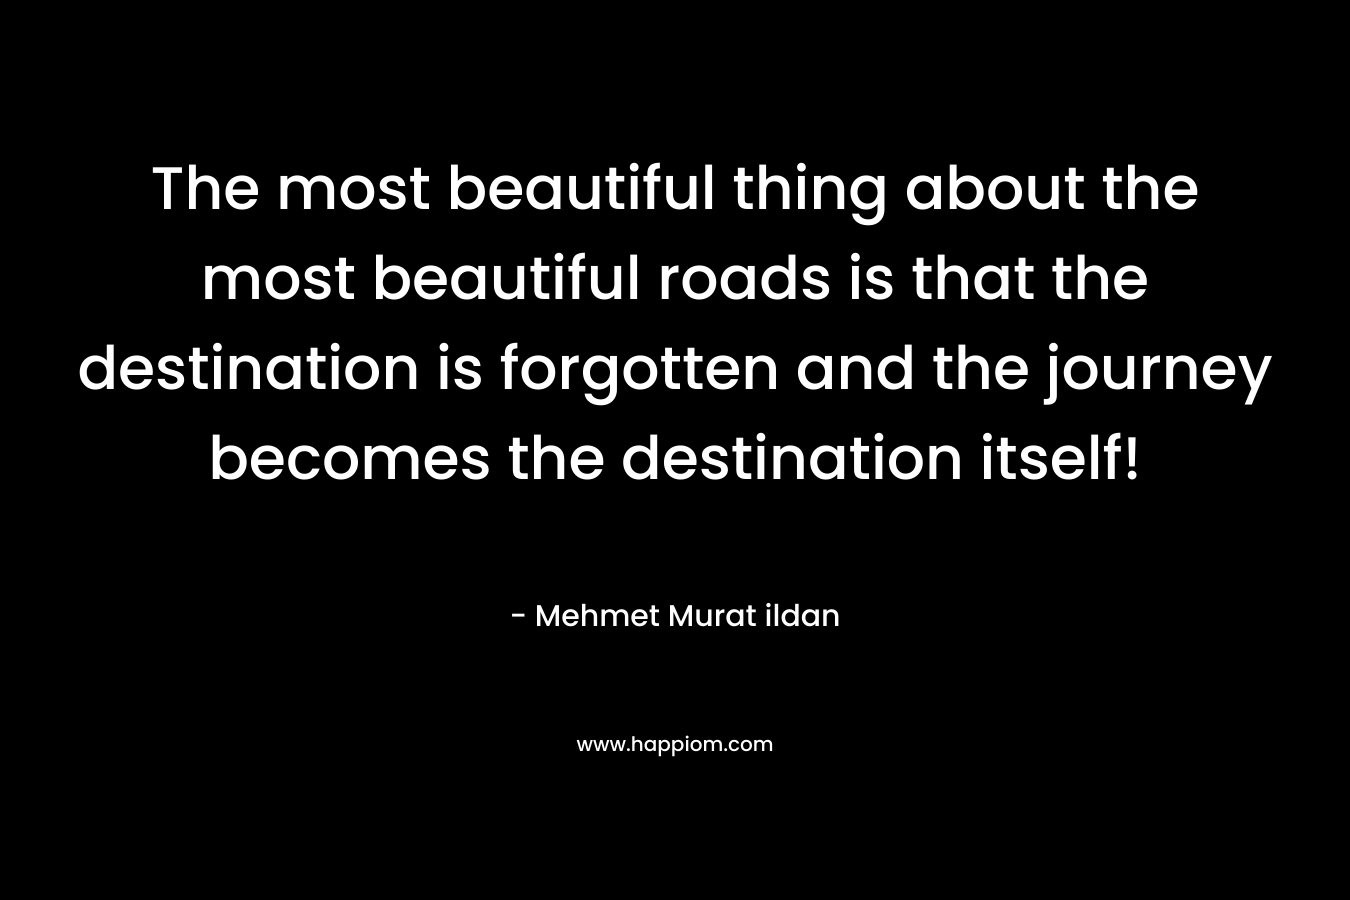 The most beautiful thing about the most beautiful roads is that the destination is forgotten and the journey becomes the destination itself!